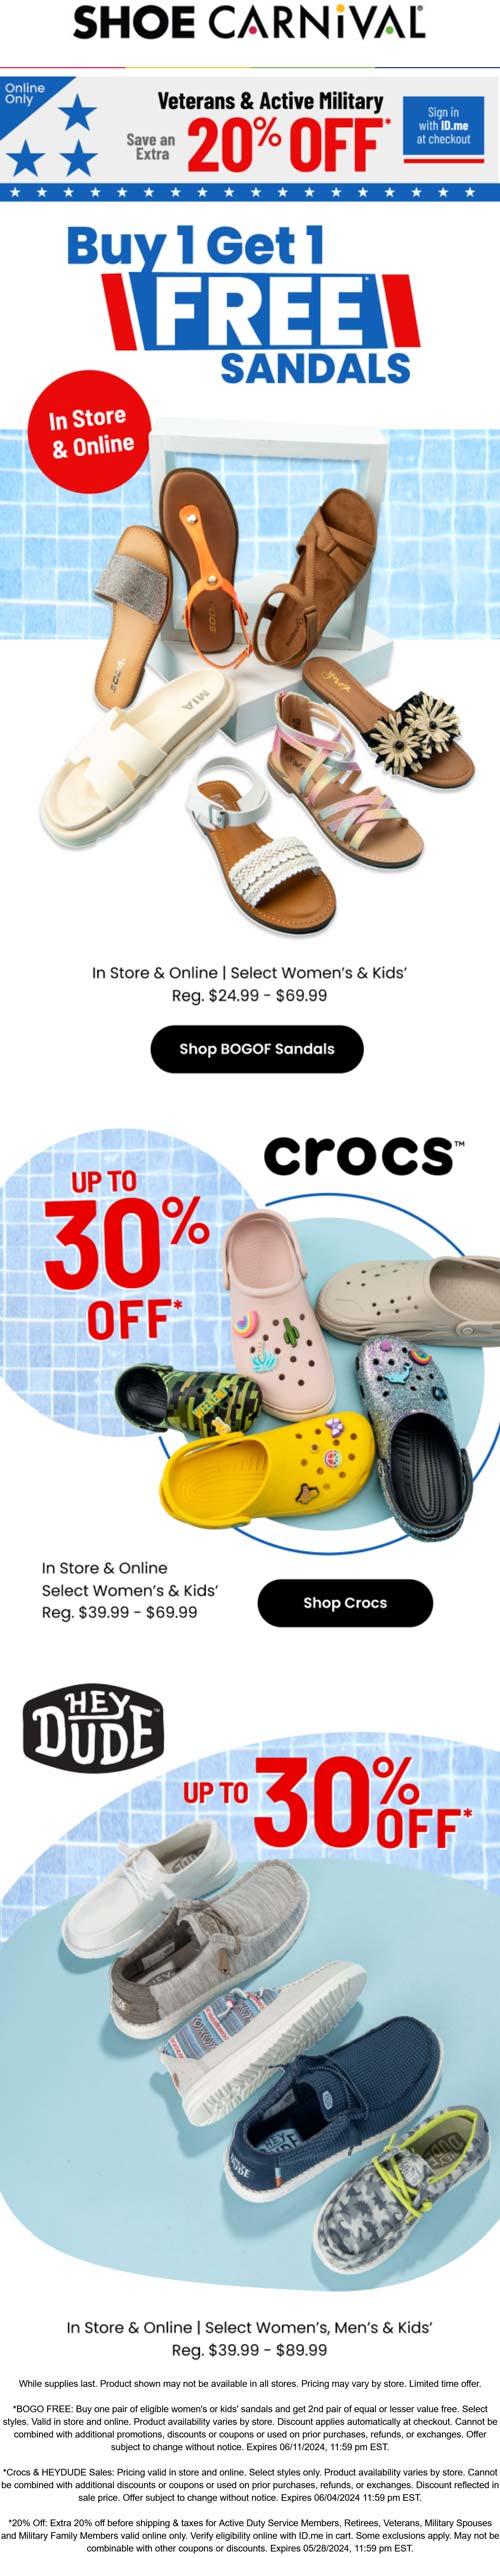 Shoe Carnival stores Coupon  Second sandals free + veterans & active enjoy another 20% off at Shoe Carnival #shoecarnival 